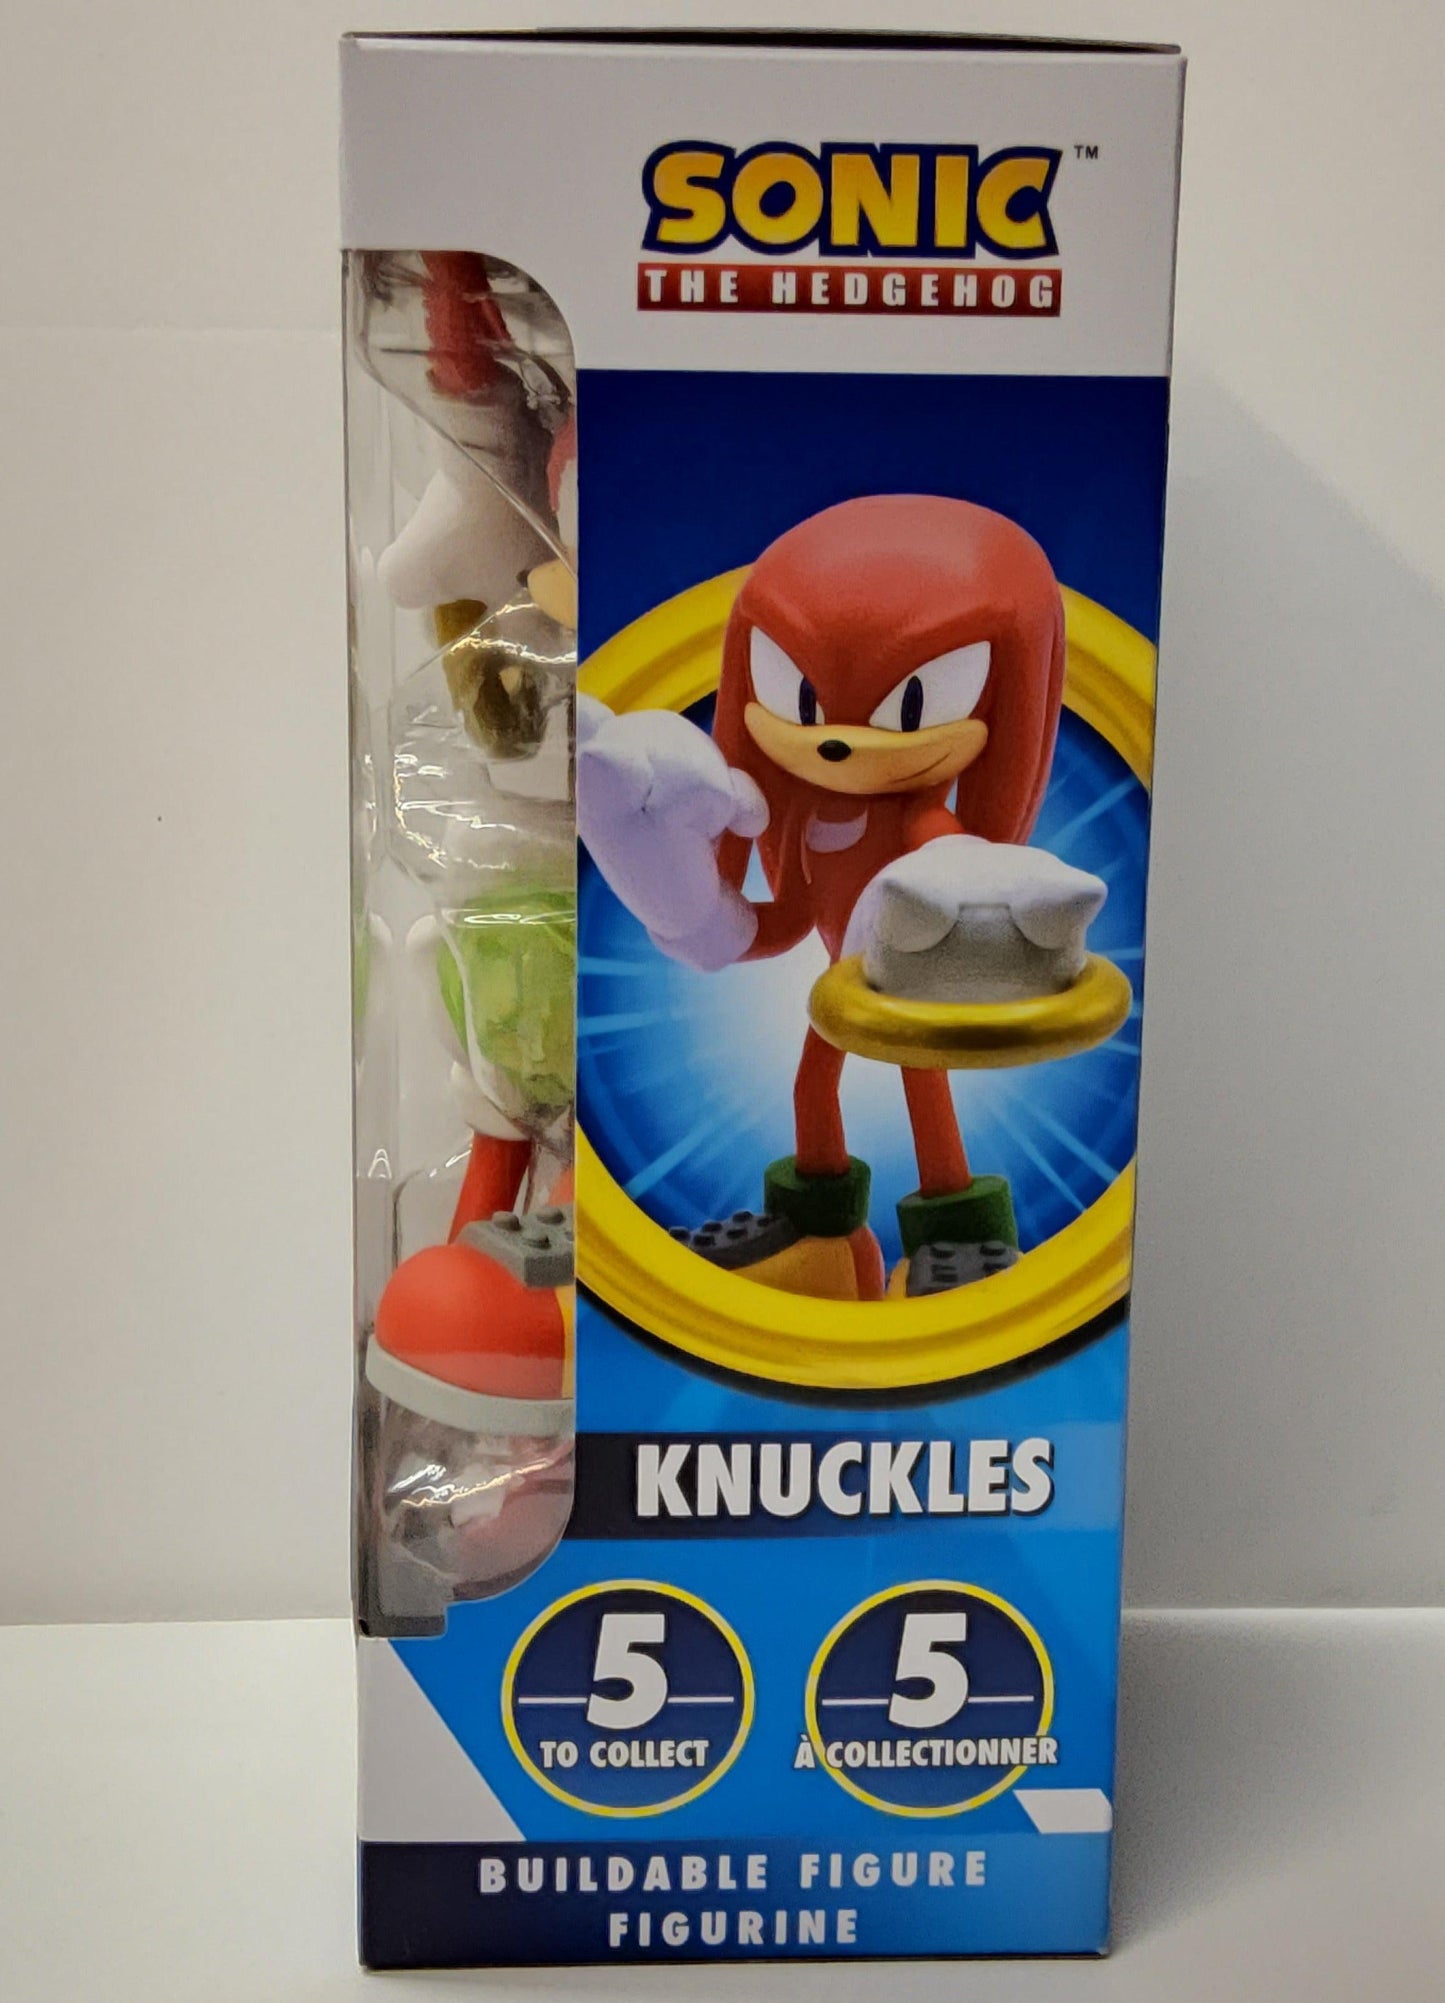 Just Toys INTL Sonic the Hedgehog Knuckles Buildable Figure Figurine - Logan's Toy Chest